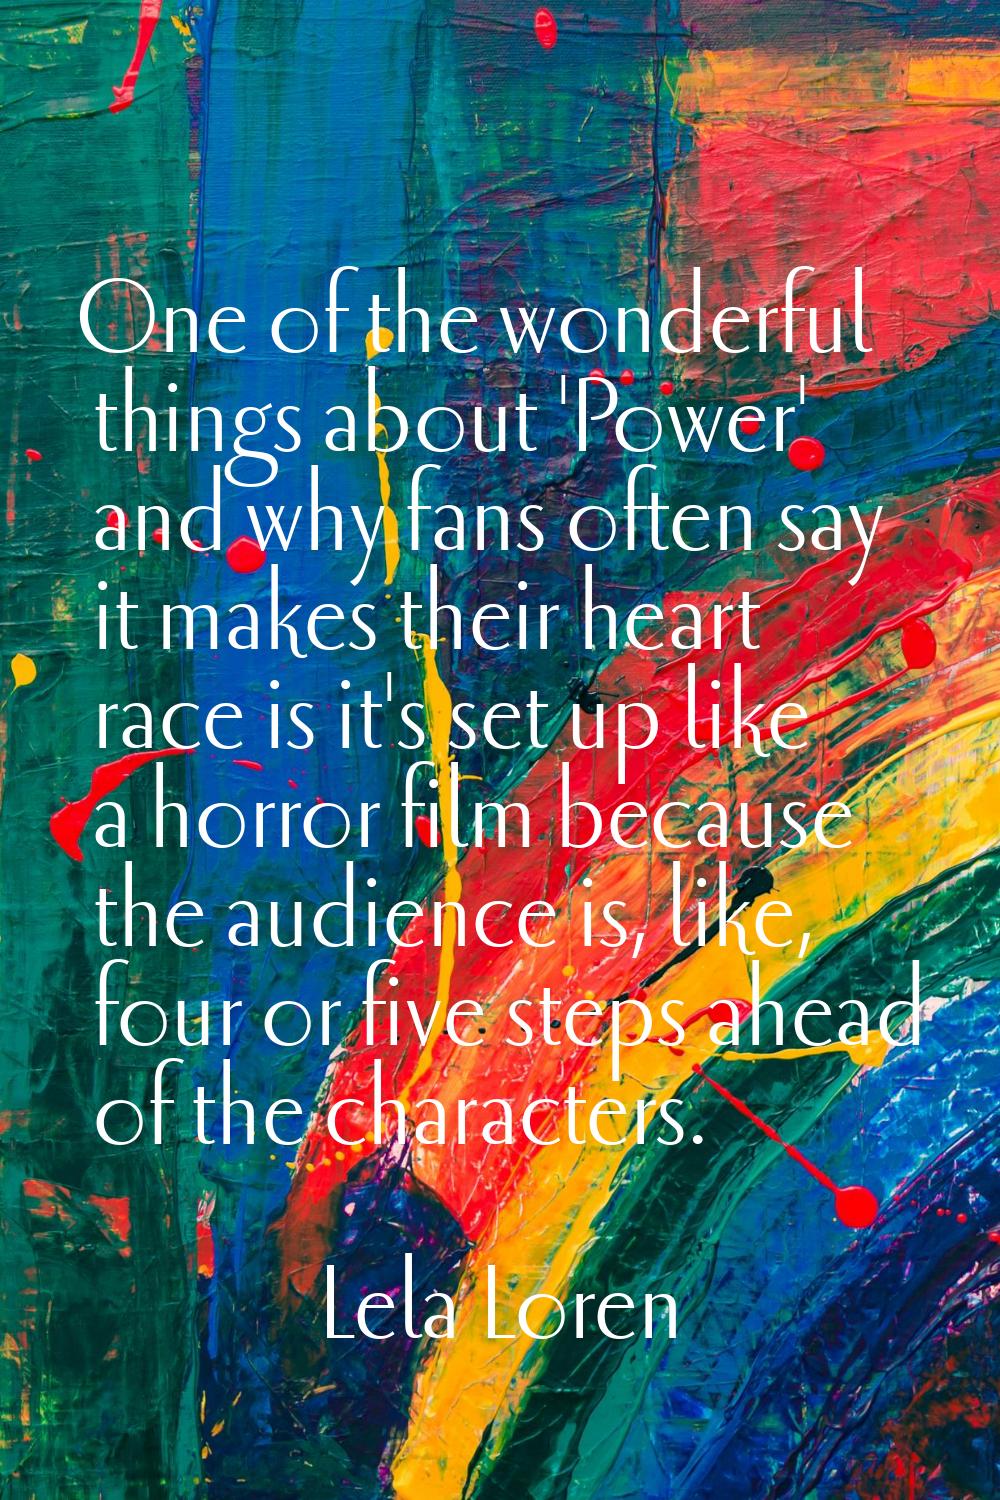 One of the wonderful things about 'Power' and why fans often say it makes their heart race is it's 